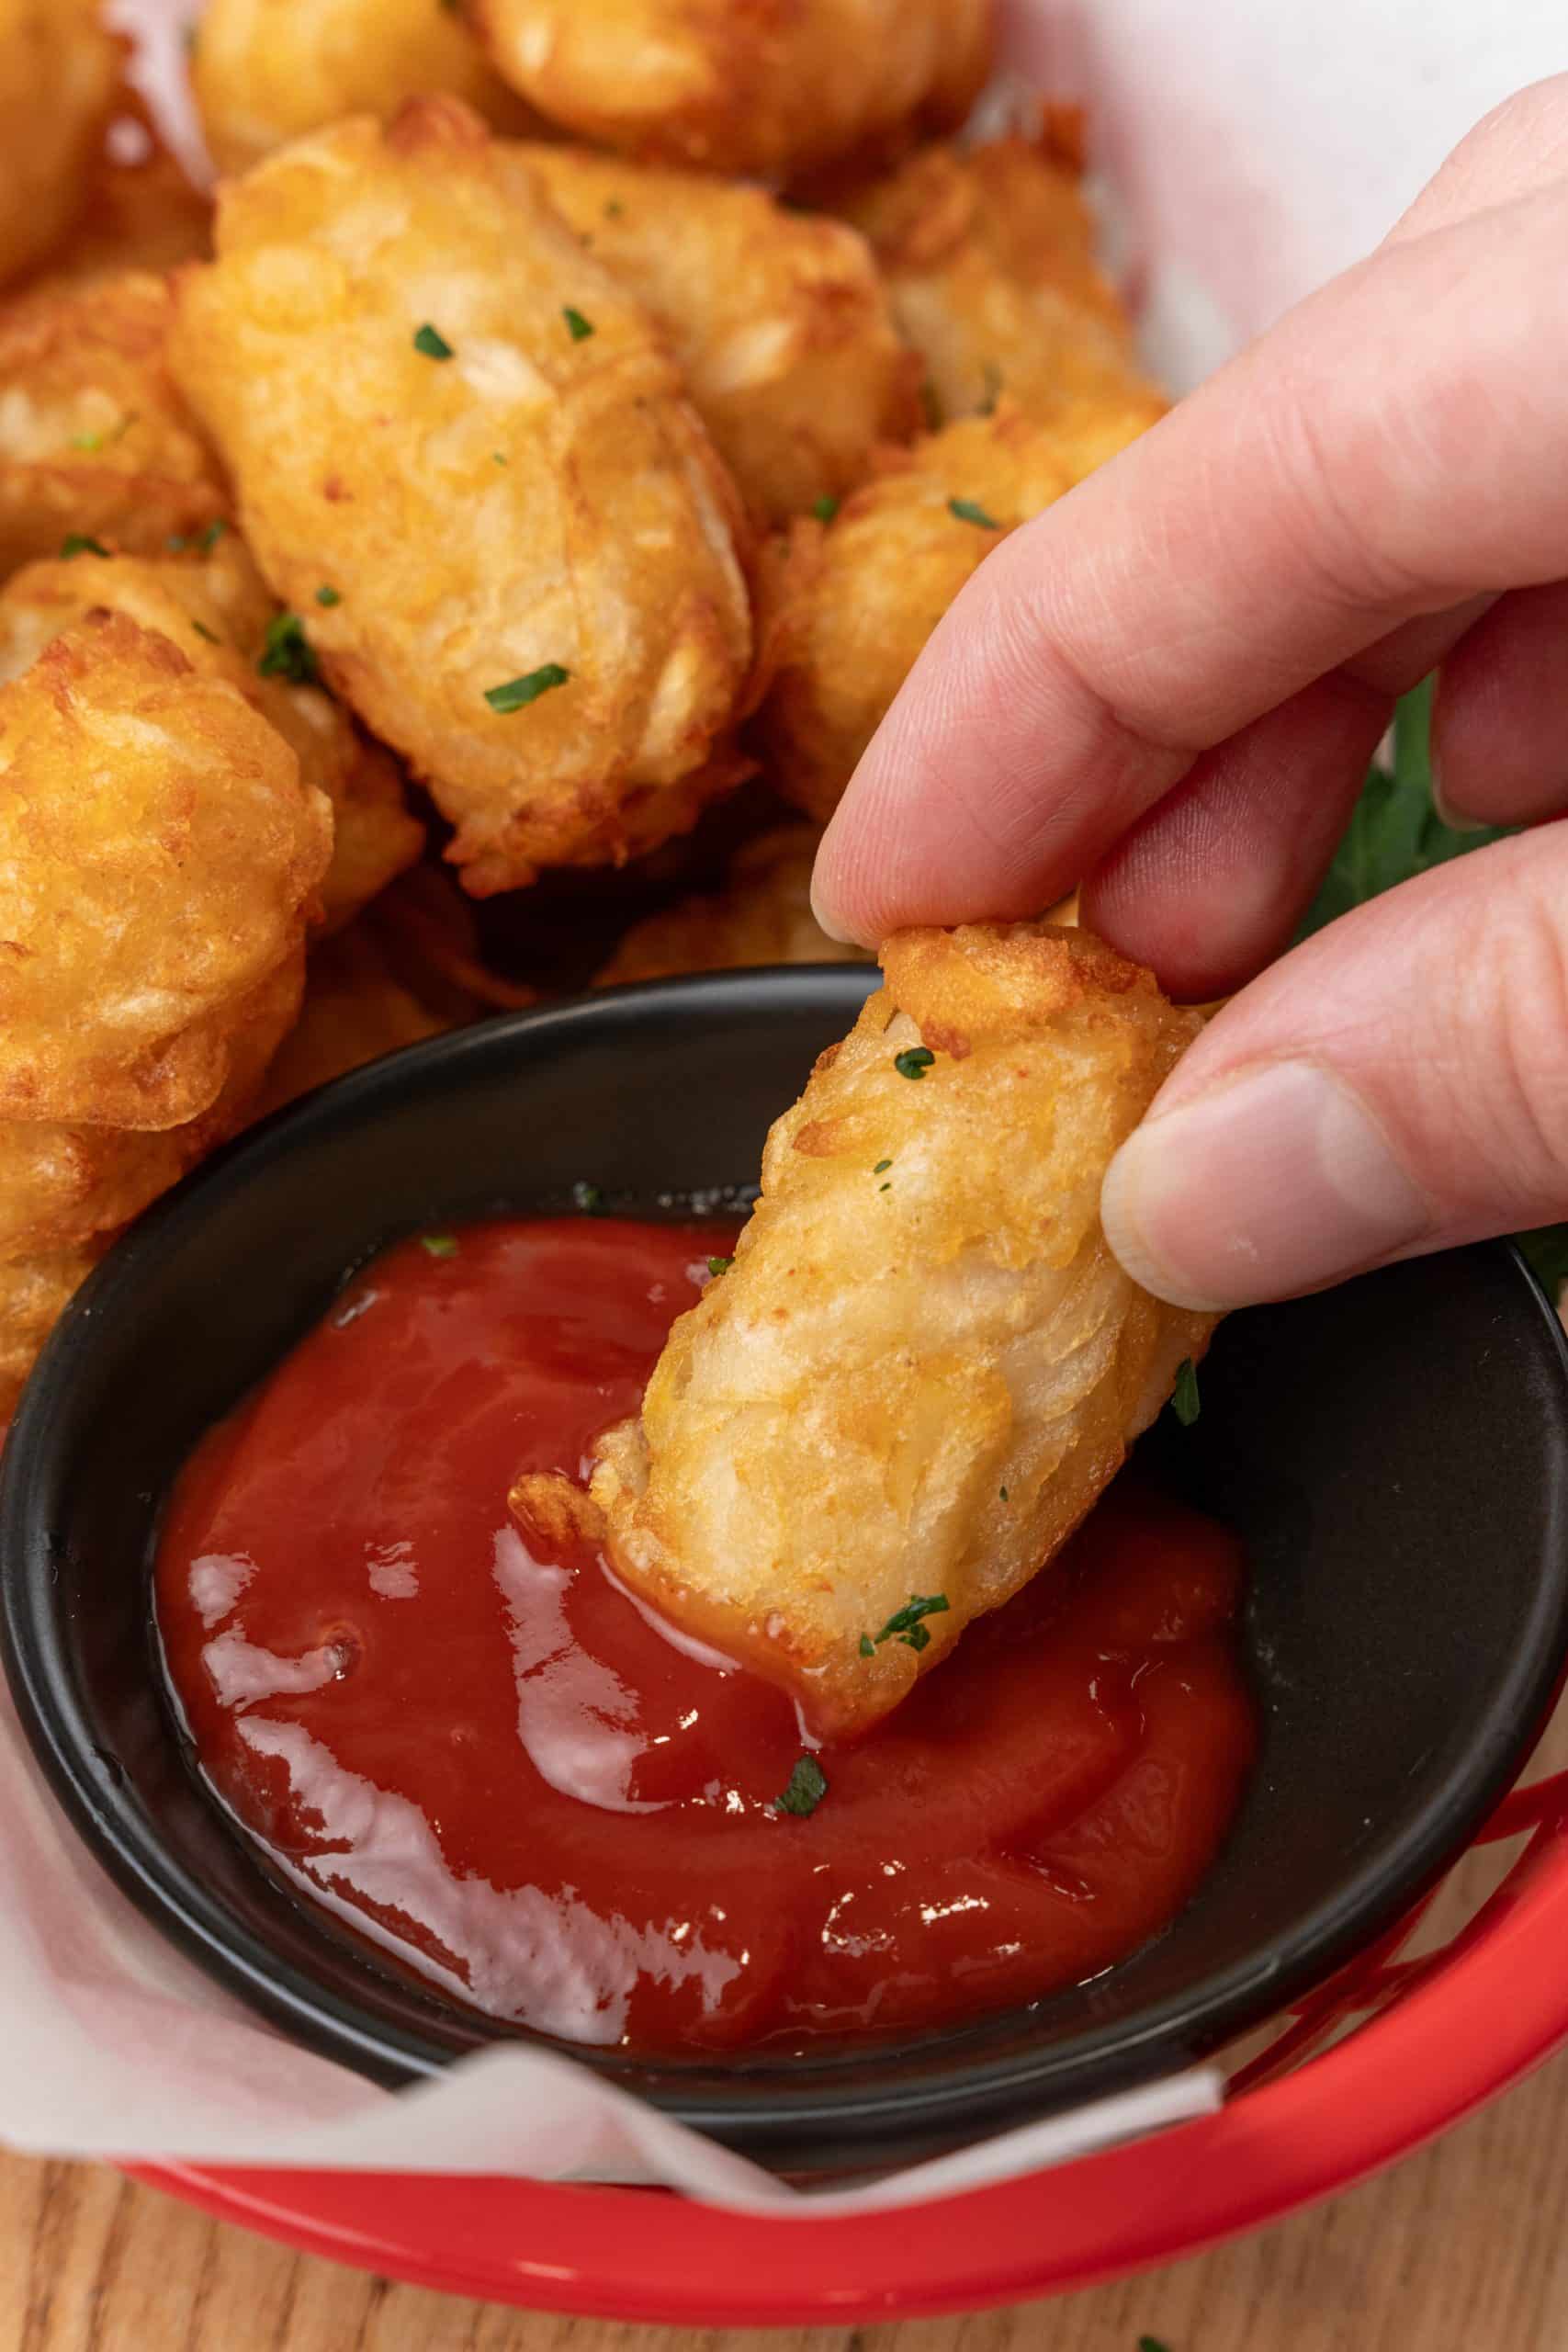 a hand dunking a fried tater tot in a small black bowl filled with ketchup